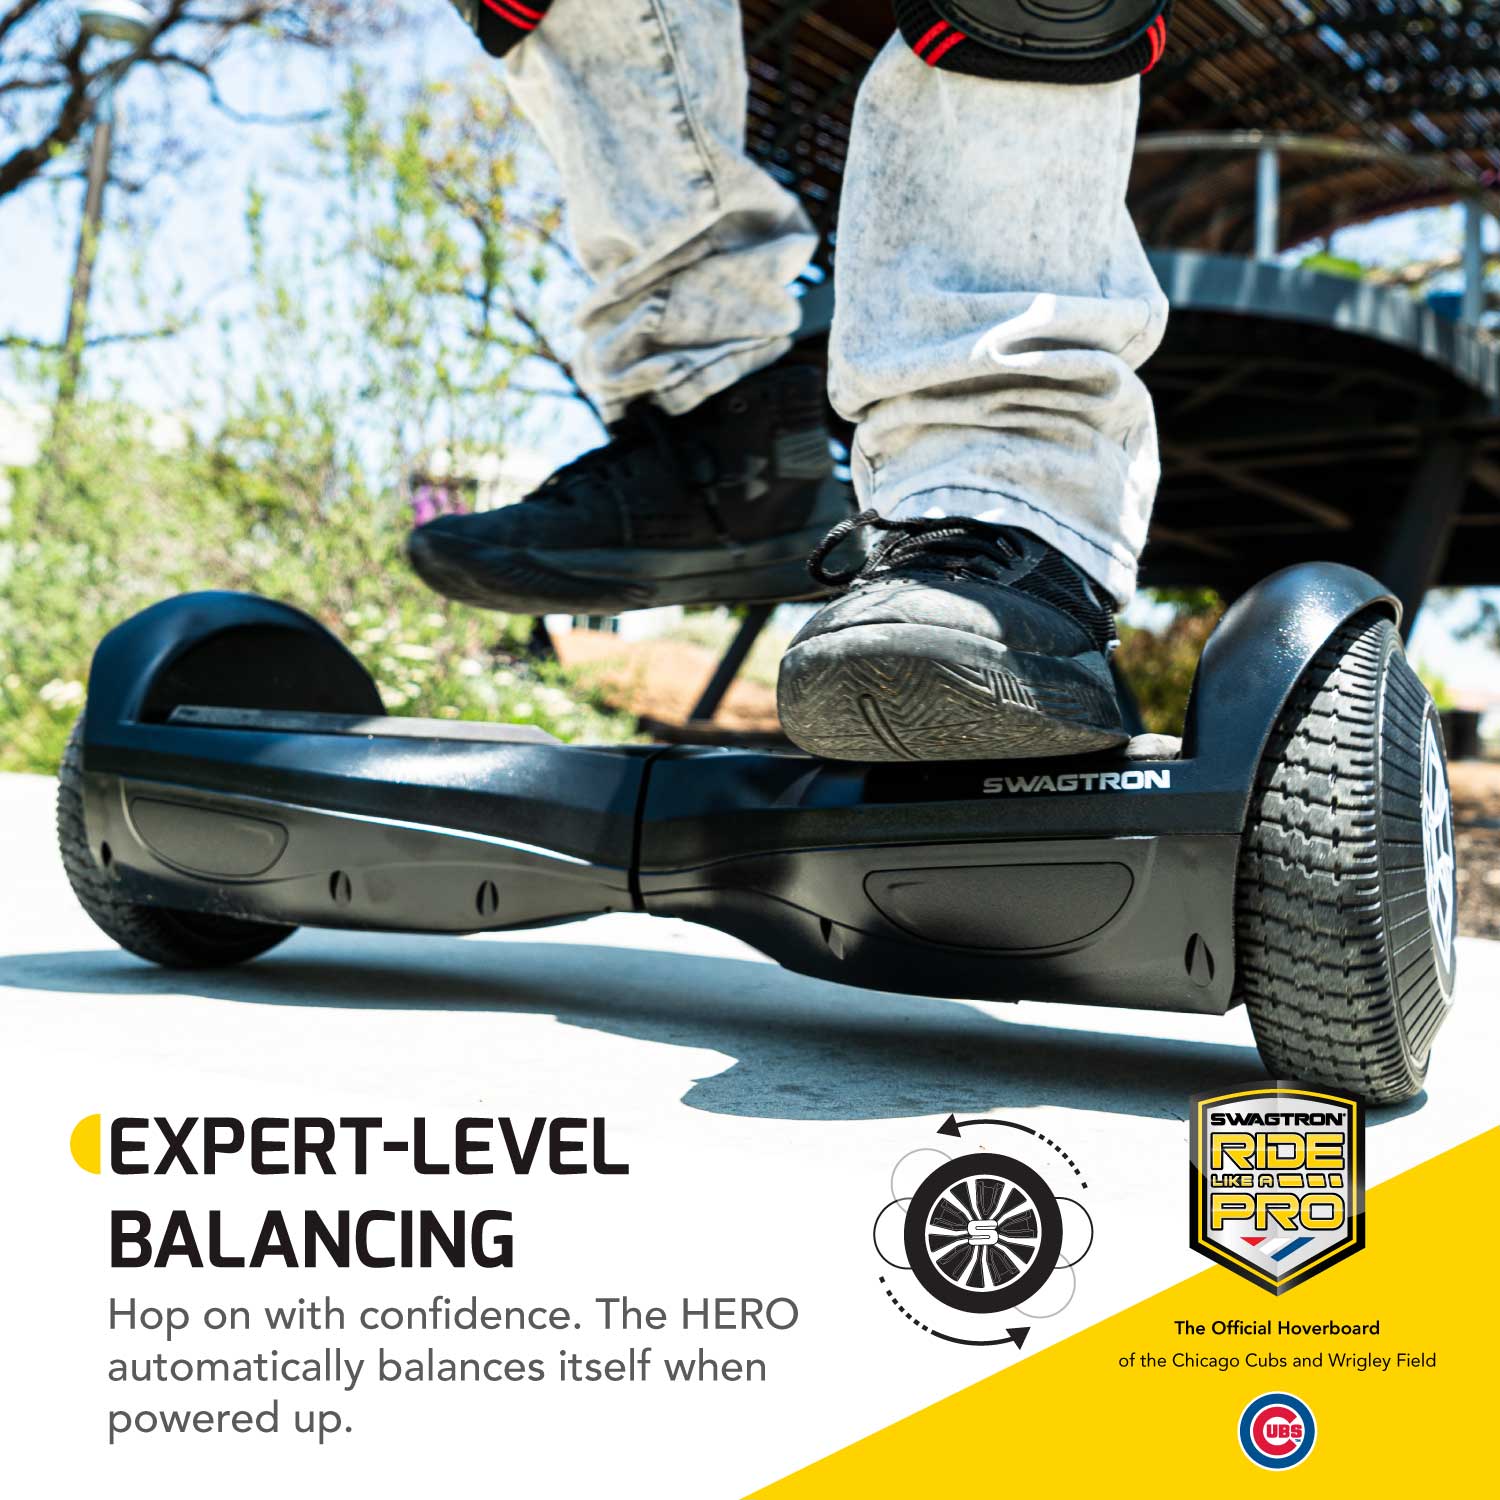 SWAGTRON Swagboard HERO Hoverboard, Dual 250W High-Torque Motors + Automatic Self-Balancing, UL2272-Compliant Lithium-Free Battery with SentryShield® Quantum Protection - image 4 of 6